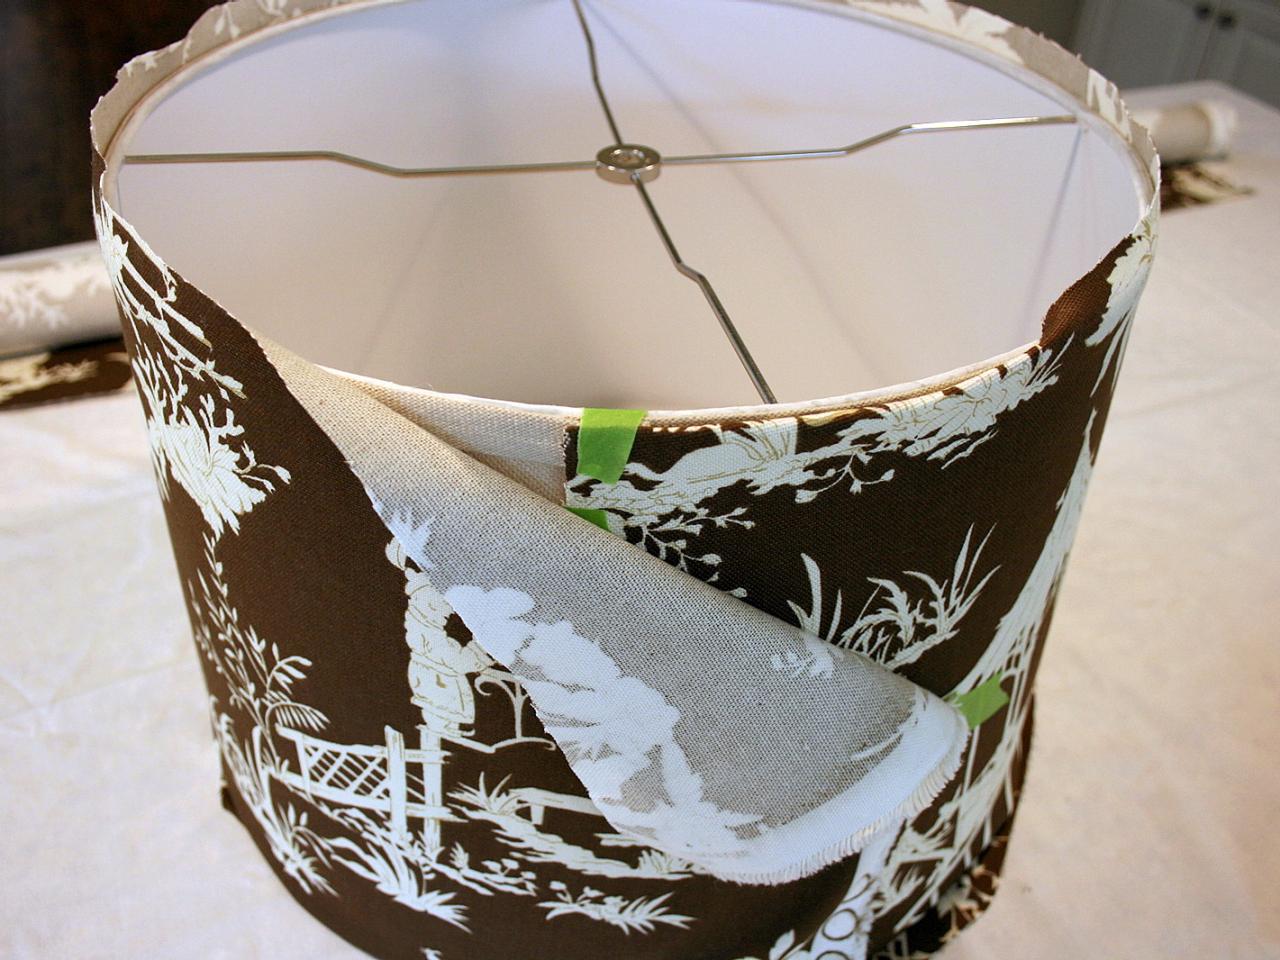 Custom Fabric Covered Lampshade, Can You Make A Lampshade Out Of Any Fabric